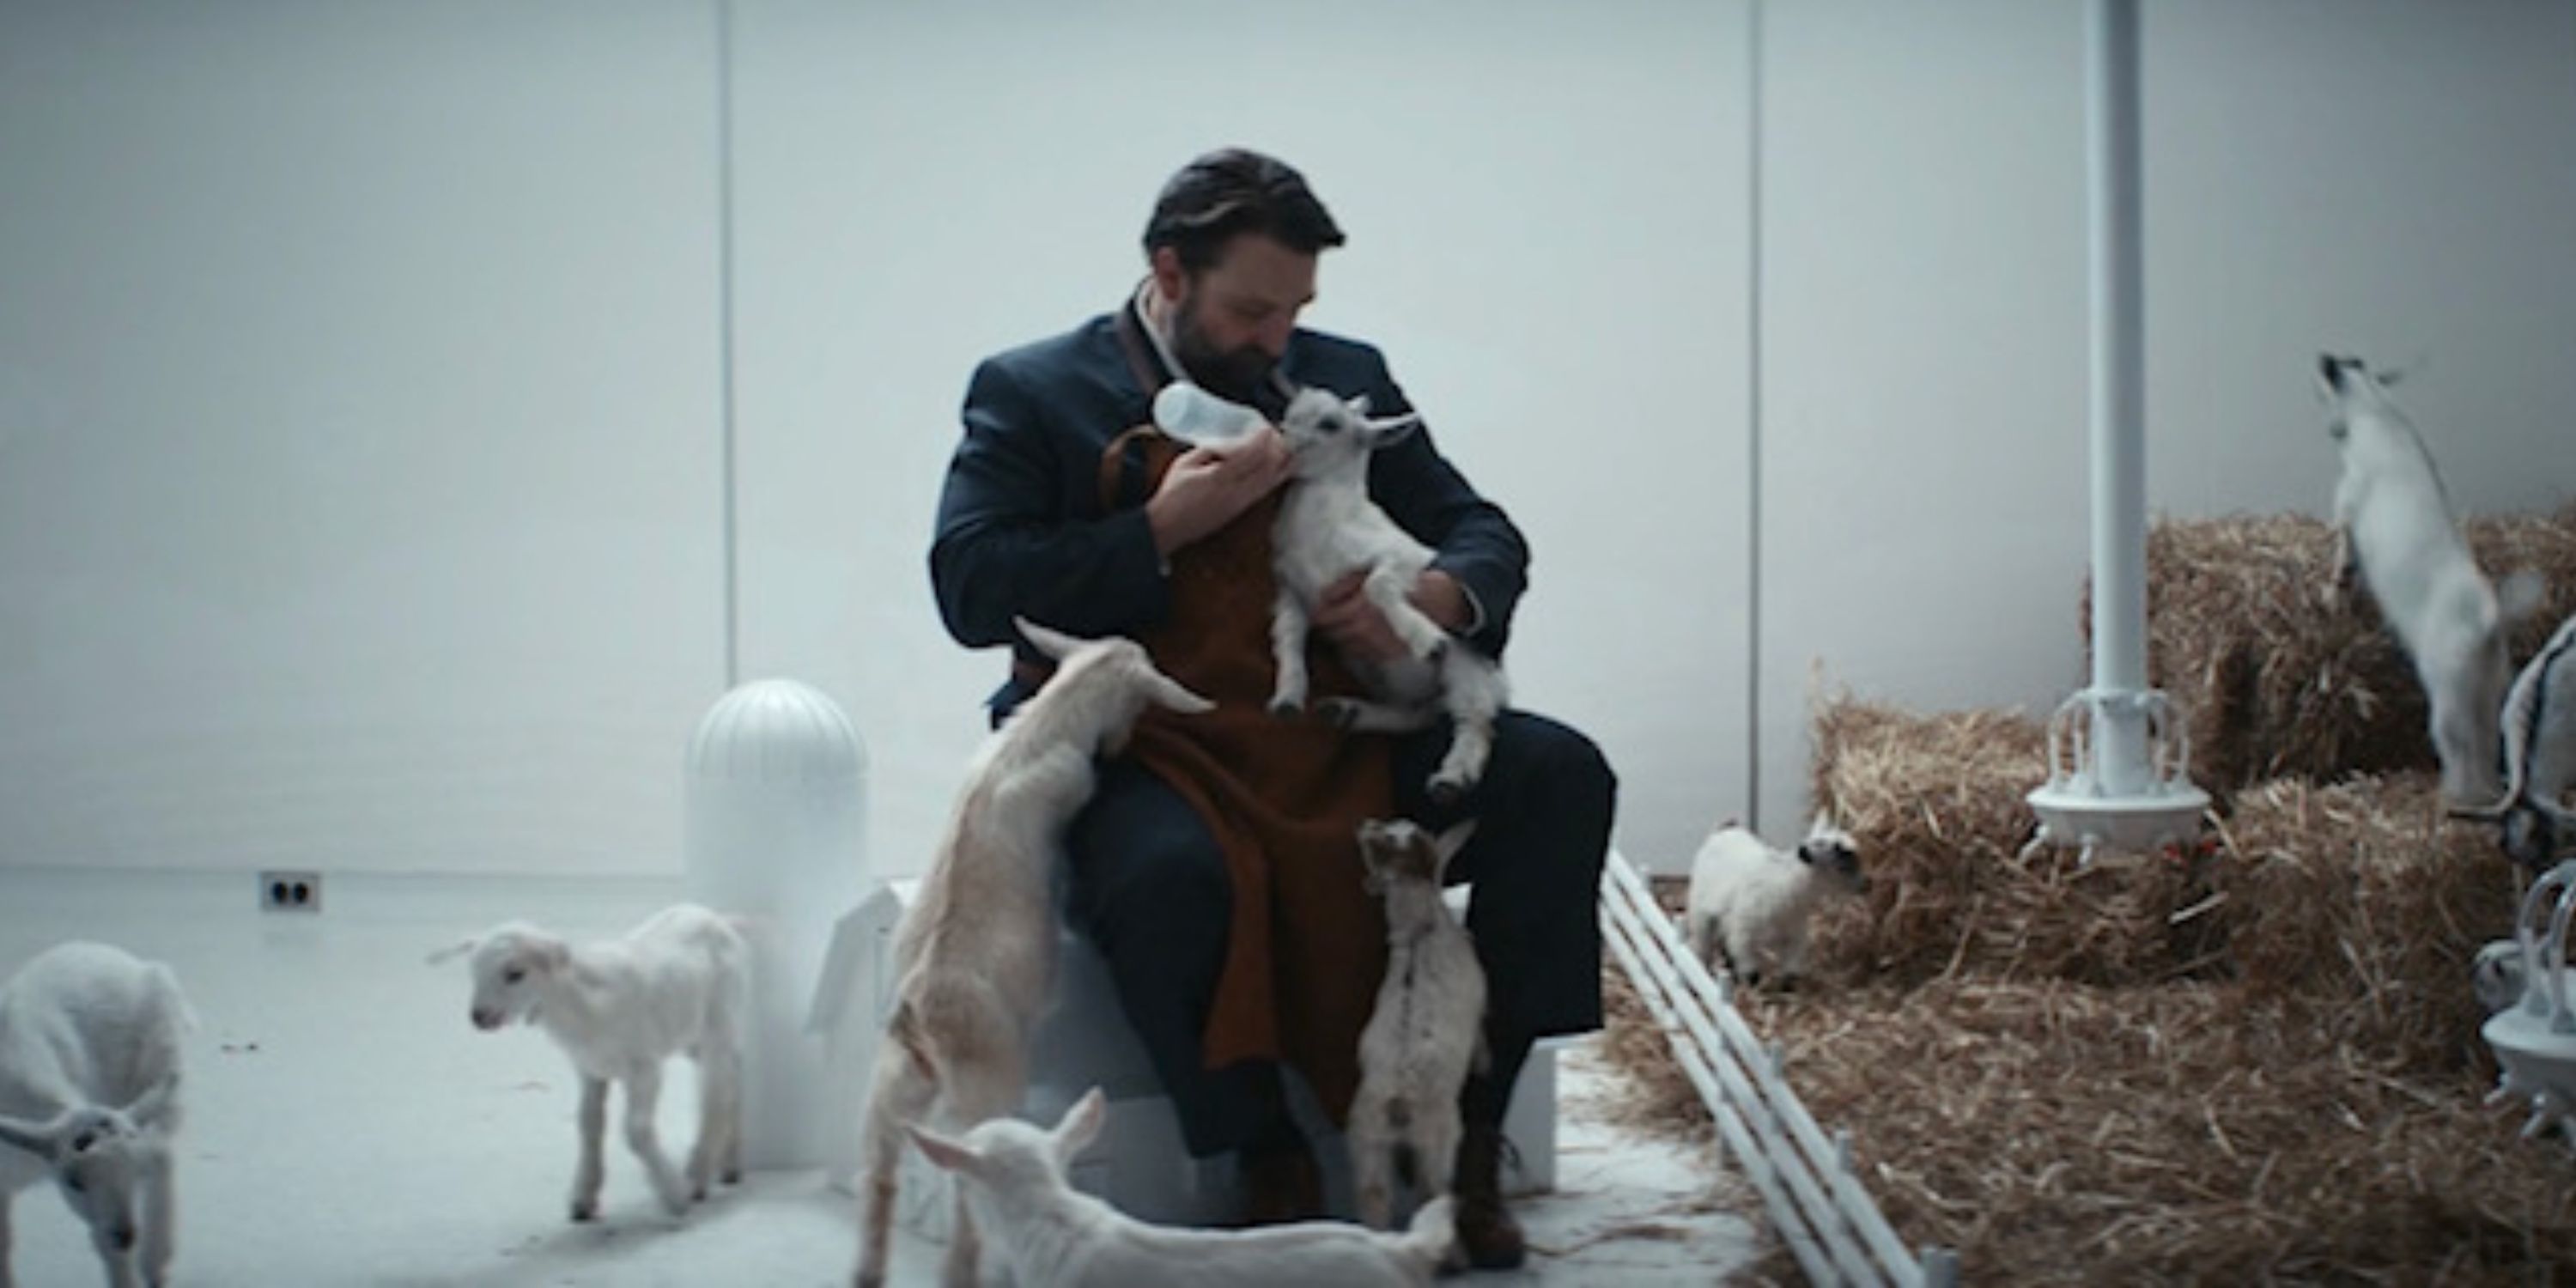 A man feeding baby goats in an all white room from 